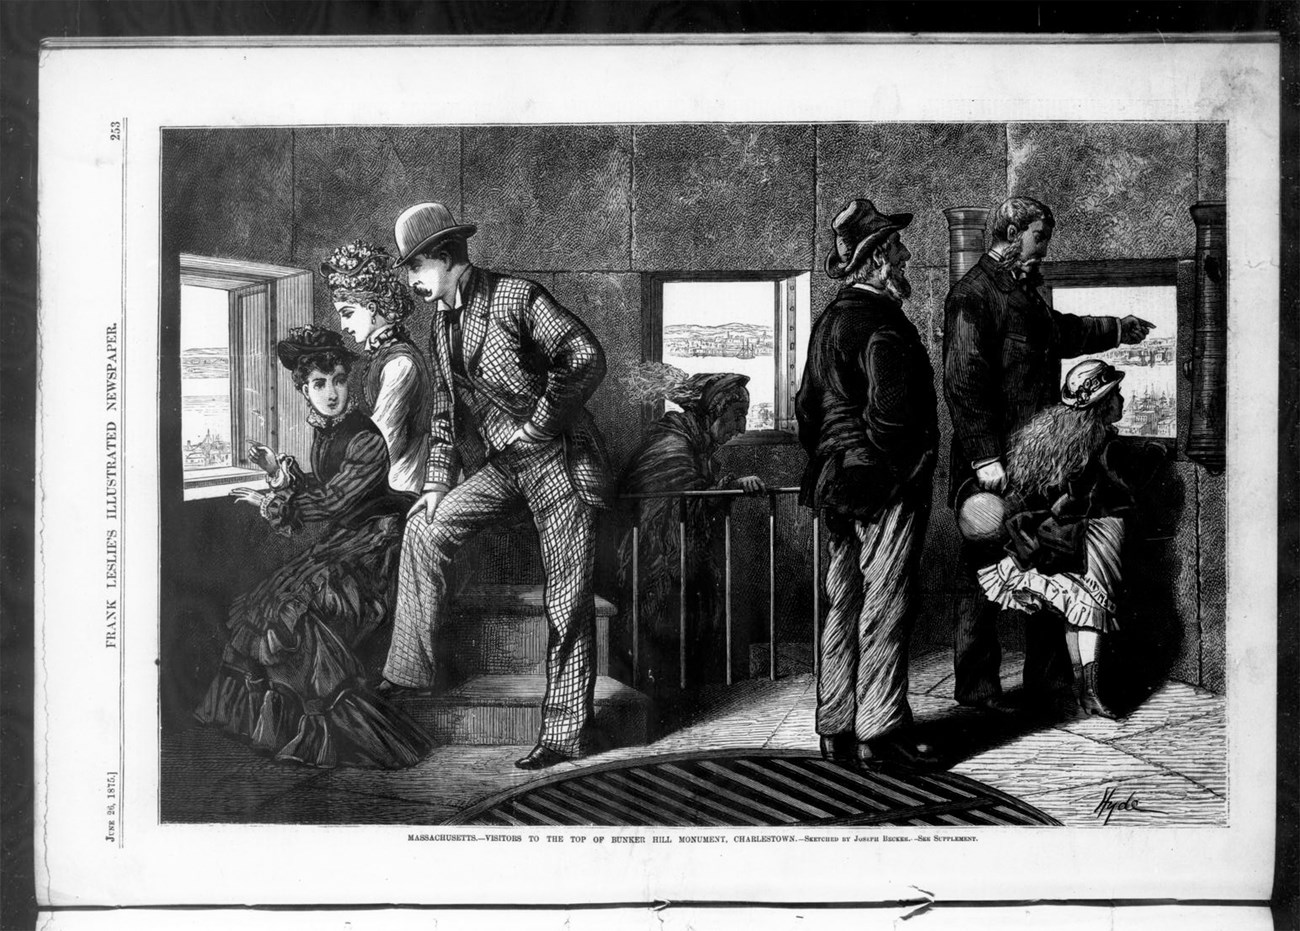 Engraving of people at the top of the Bunker Hill Monument in 1875 enjoying the view.